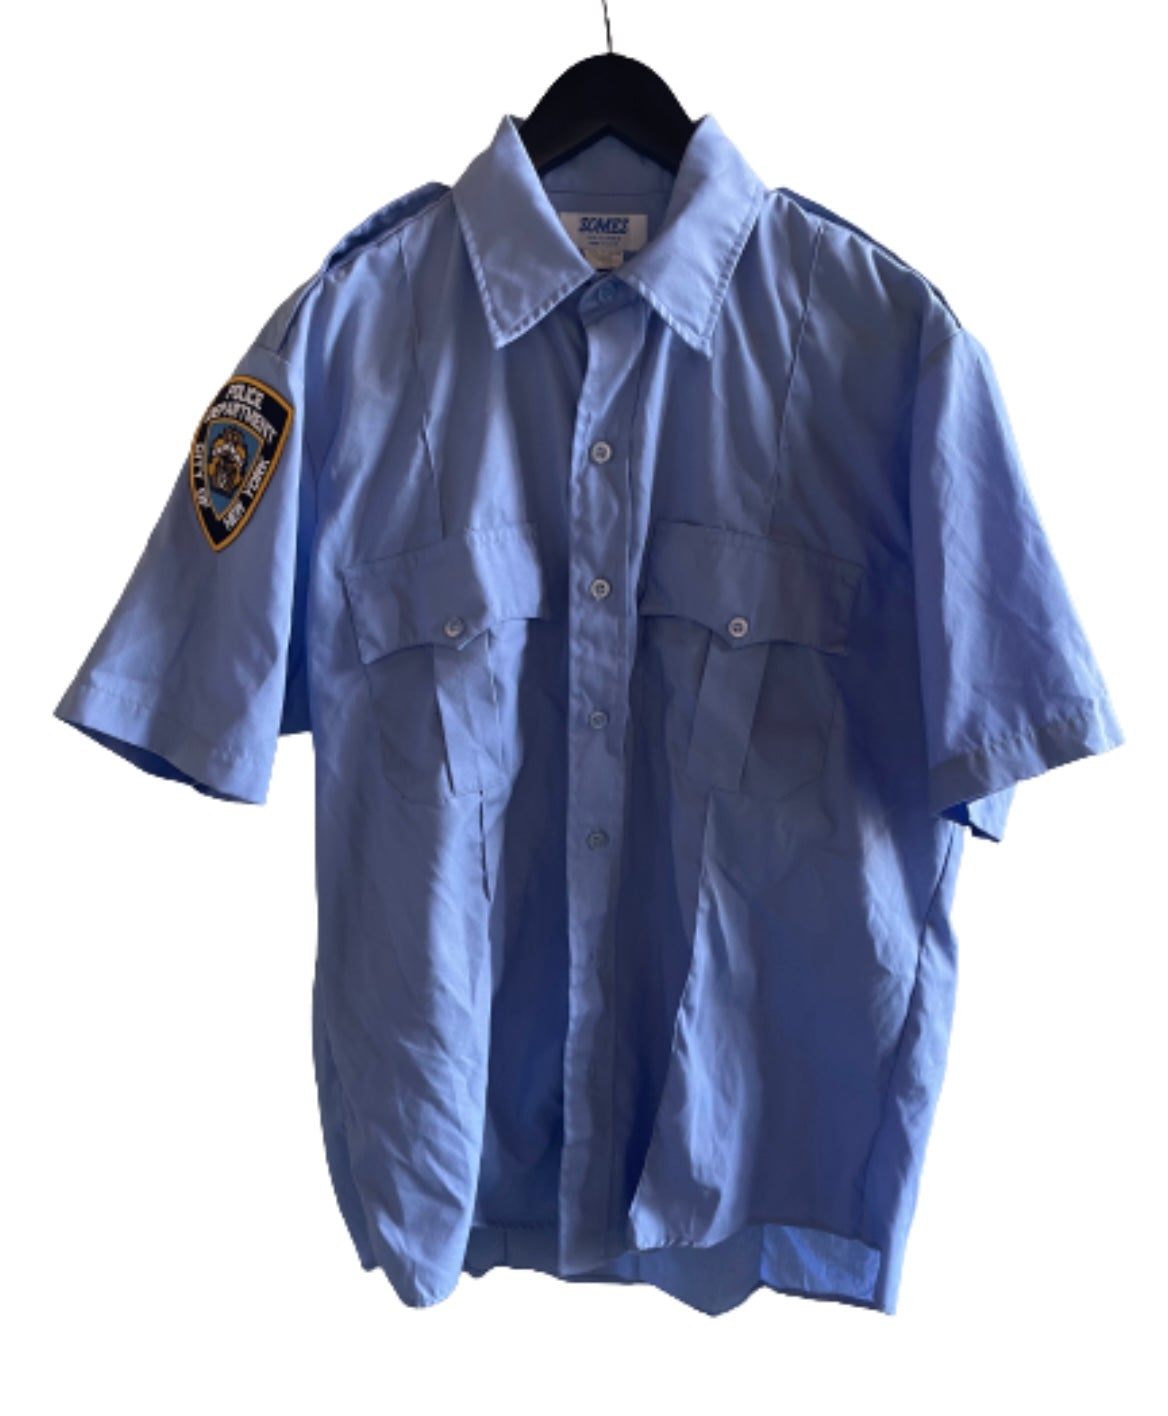 SHADES OF BLUE: Foreman's NYPD Light Blue Short Sleeve Shirt (L)